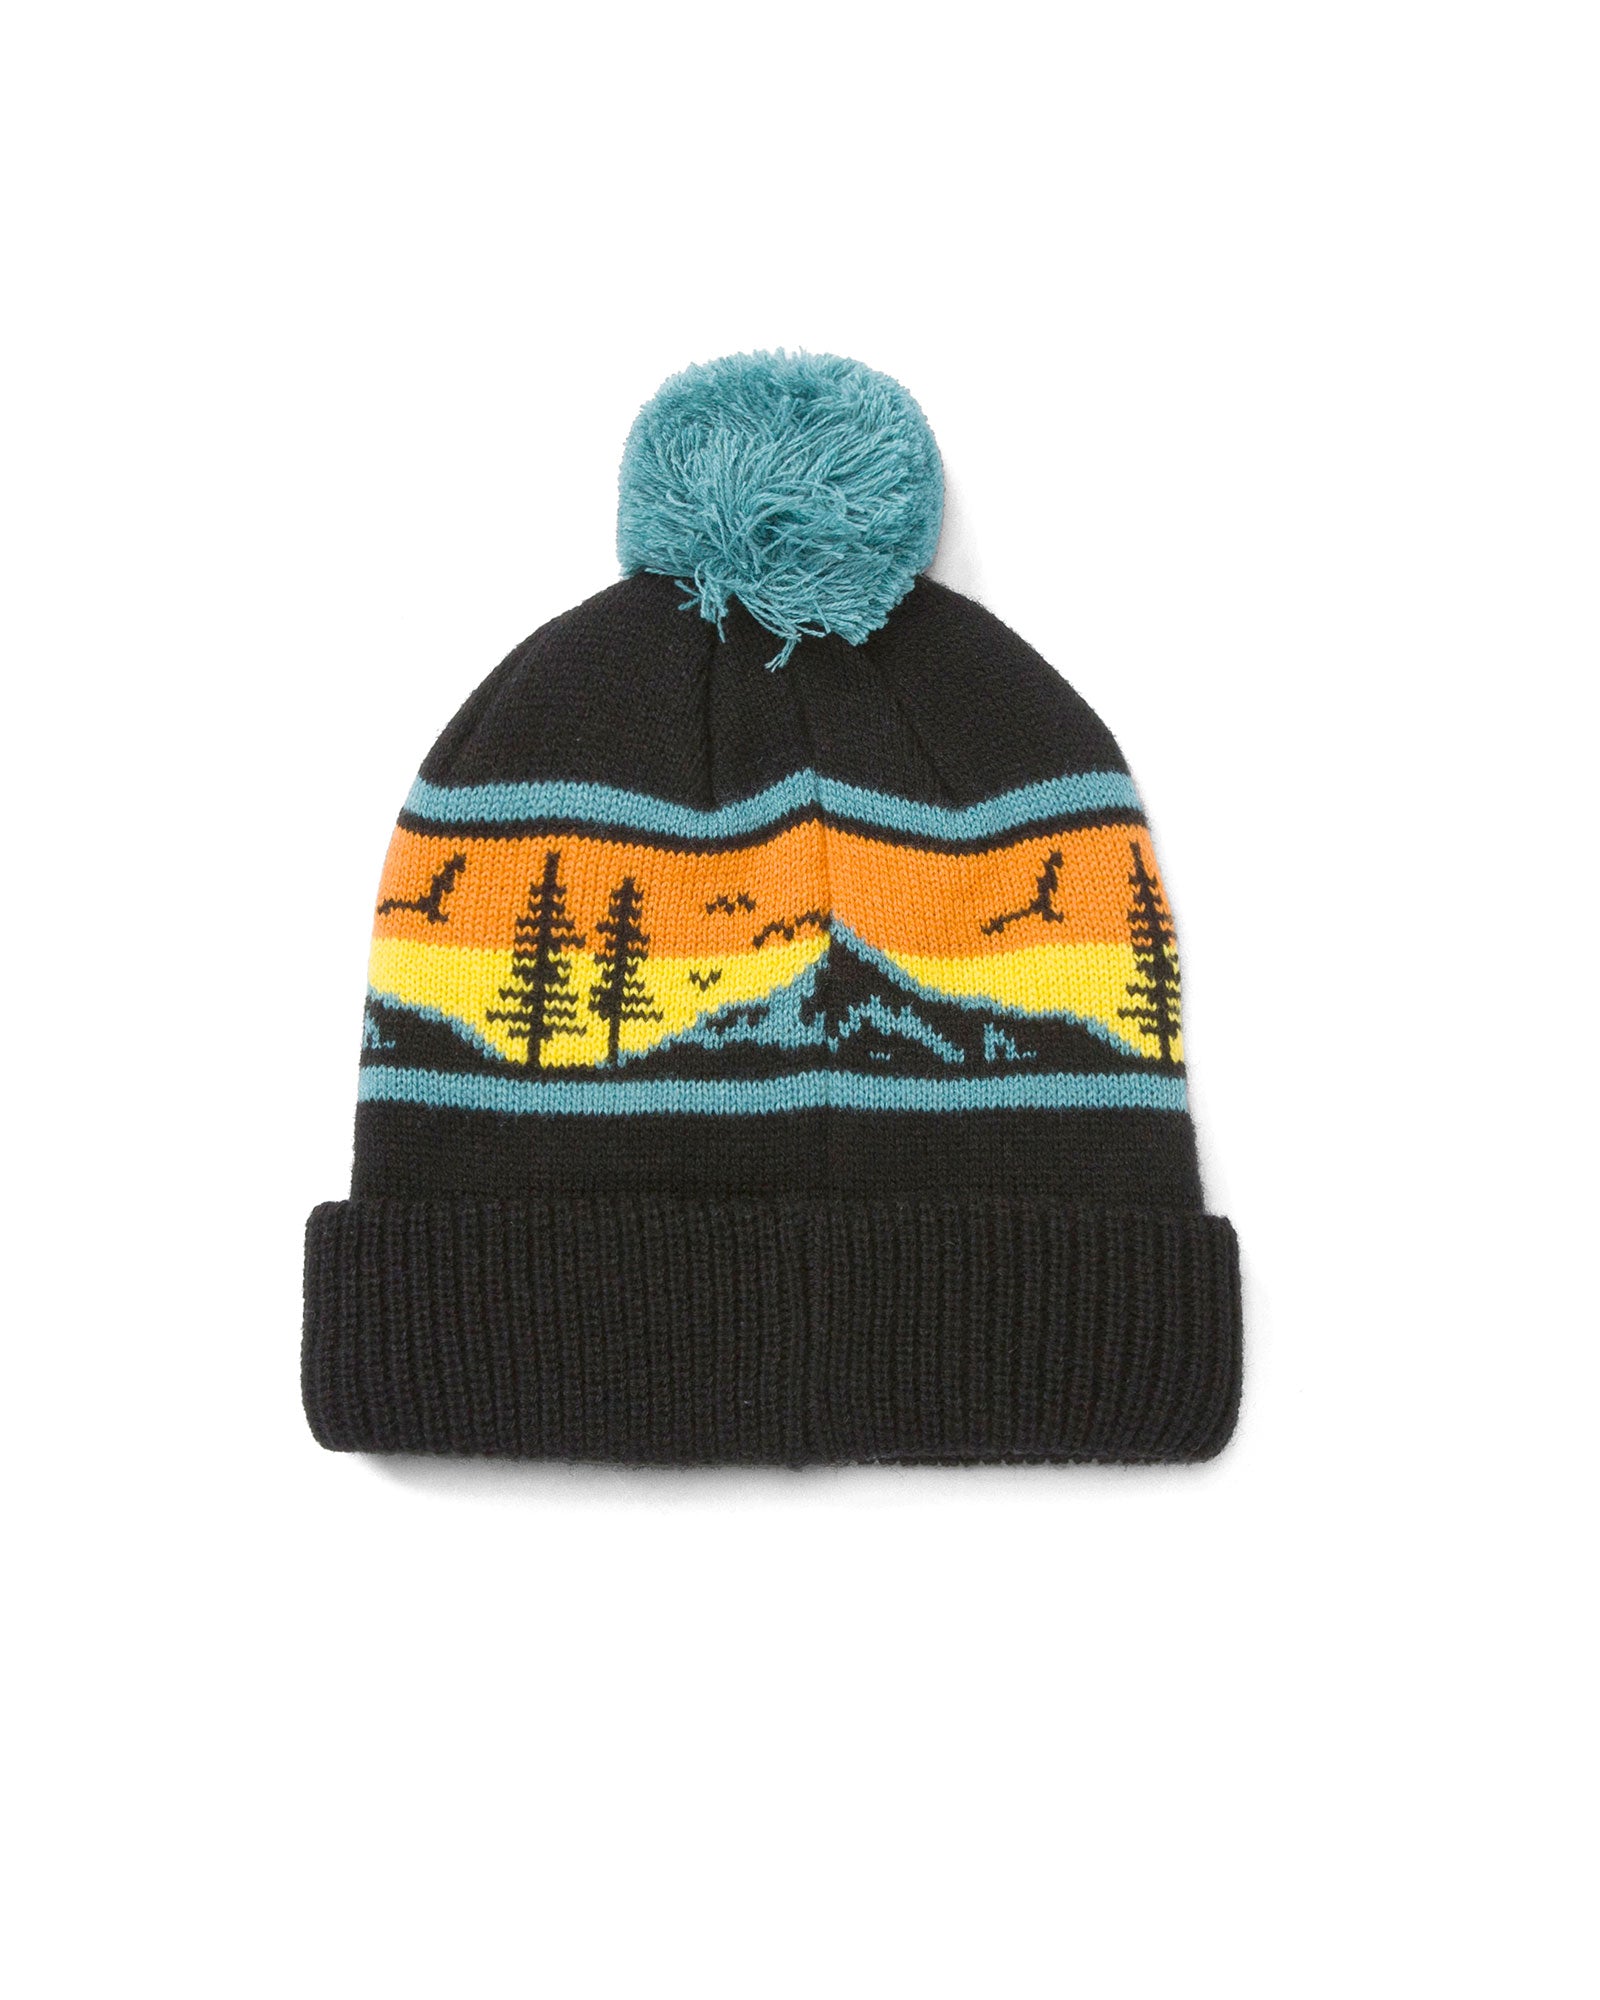 Knitted Project By Beanie Spirit Tahoe Inspired Parks – Lake Tahoe